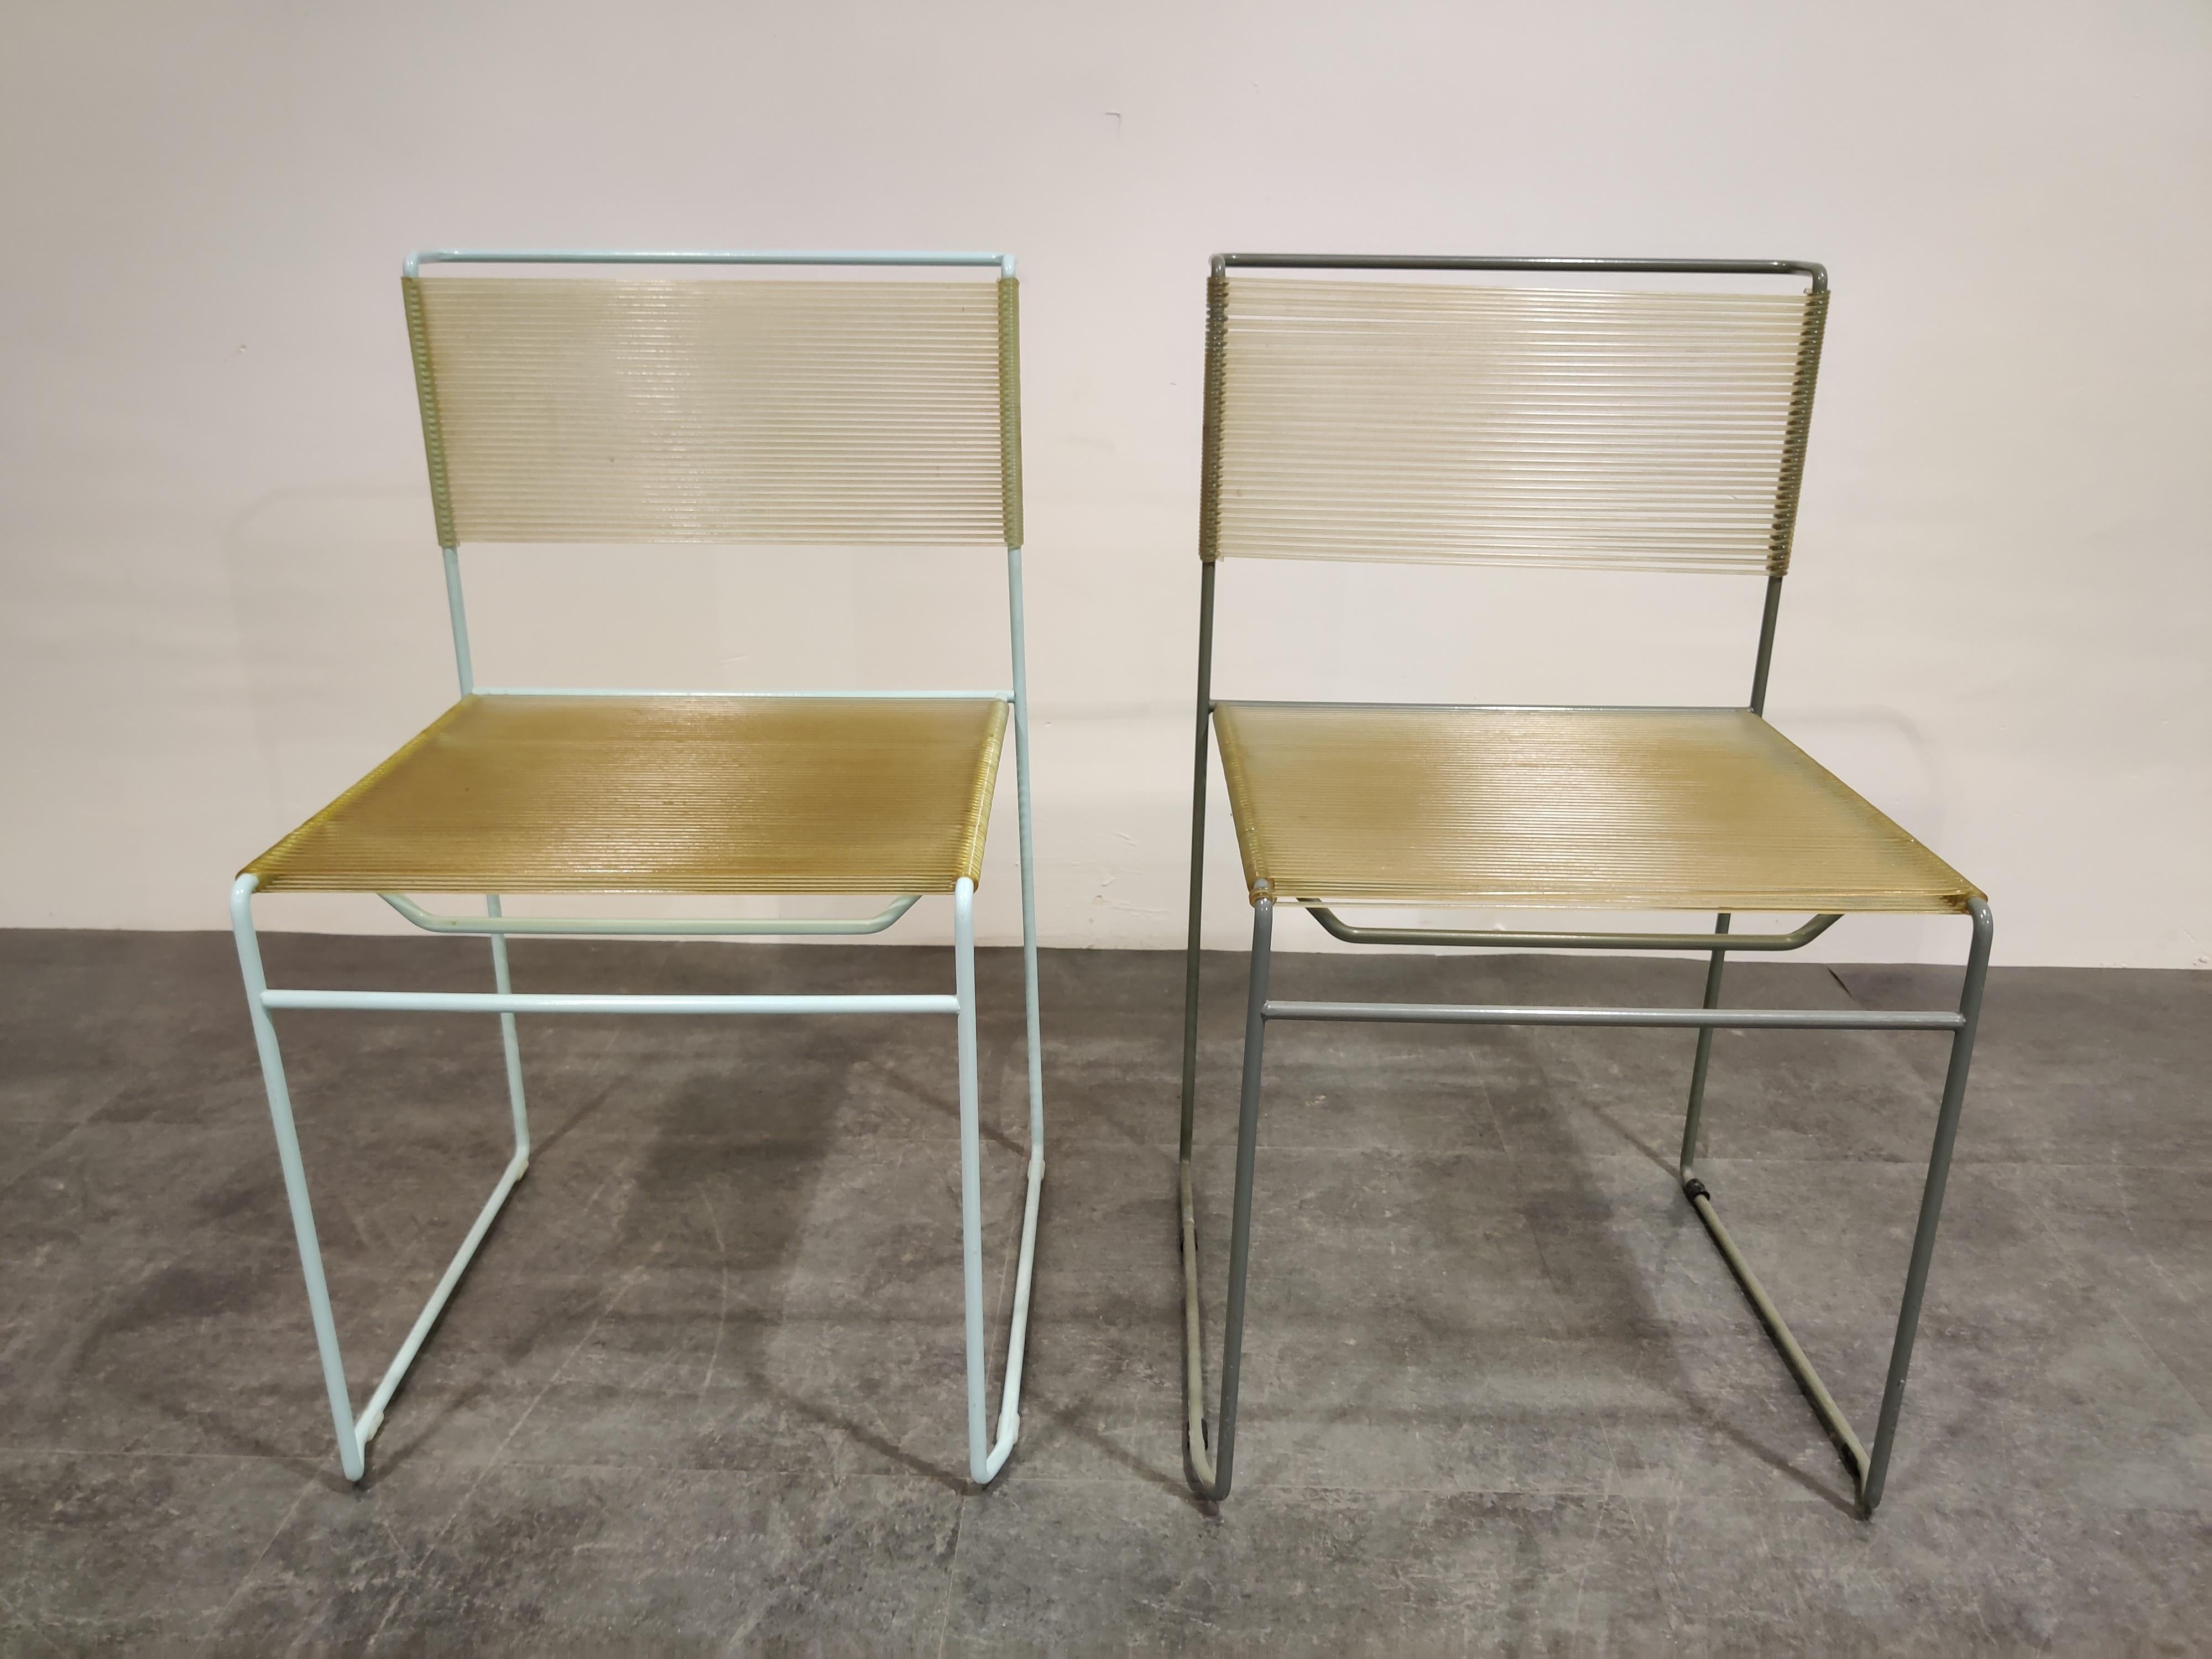 Pair of beautiful and untouched 'spaghetti' chairs designed by Giandomenico Belotti for Fly line in the 1970s

Cool design which results in two very decorative chairs.

Good condition, labeled underneath,

1970s, Italy

Dimensions: 
Height